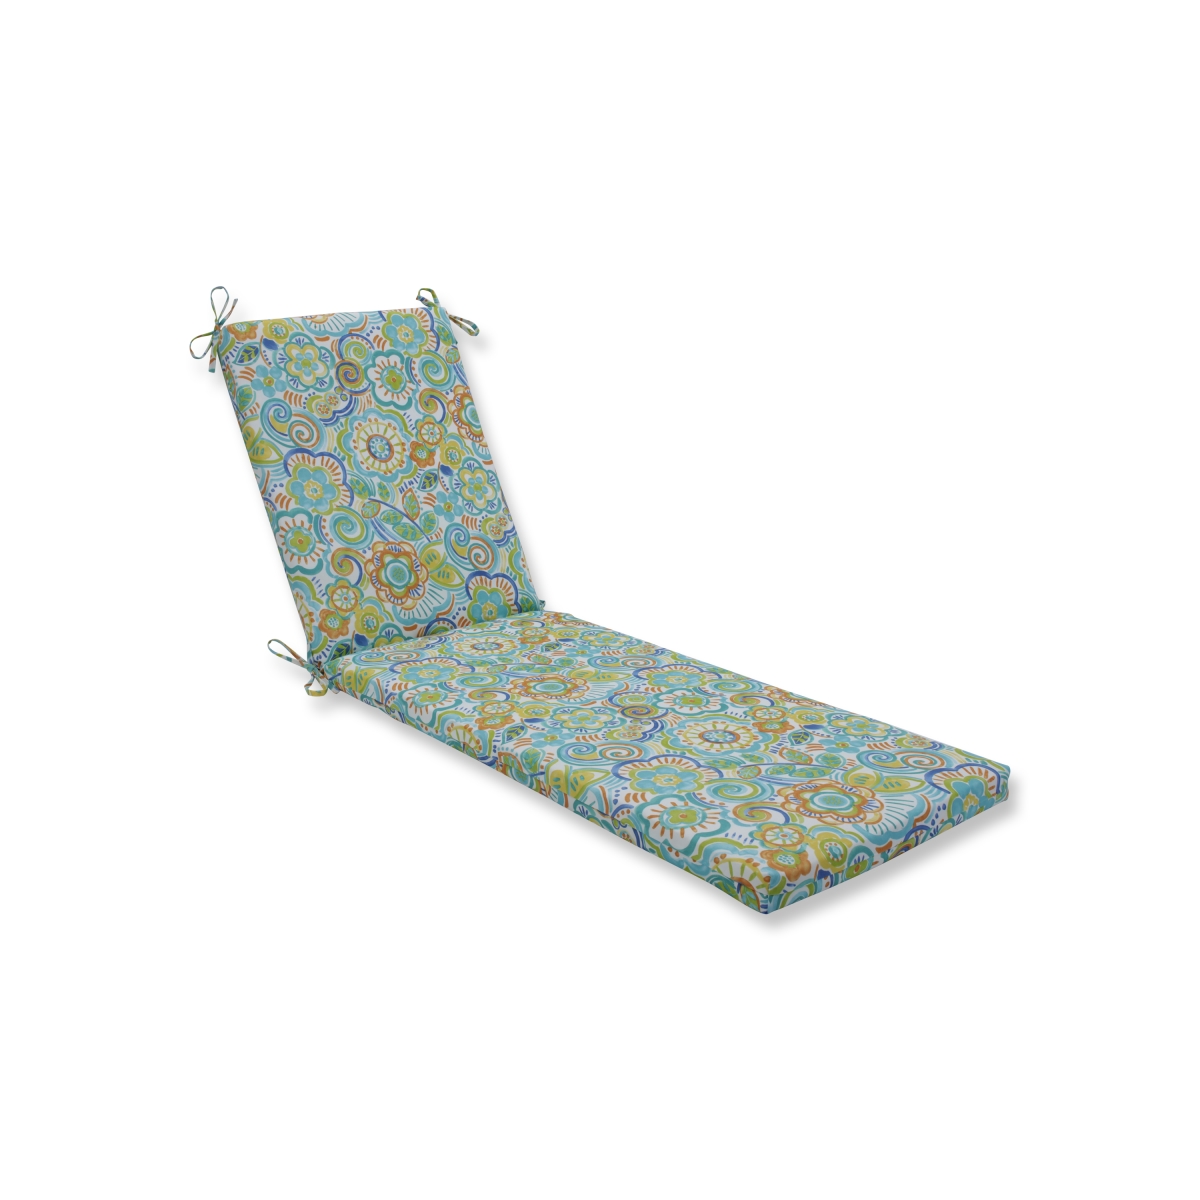 80 X 23 X 3 In. Outdoor & Indoor Bronwood Caribbean Chaise Lounge Cushion, Multicolored